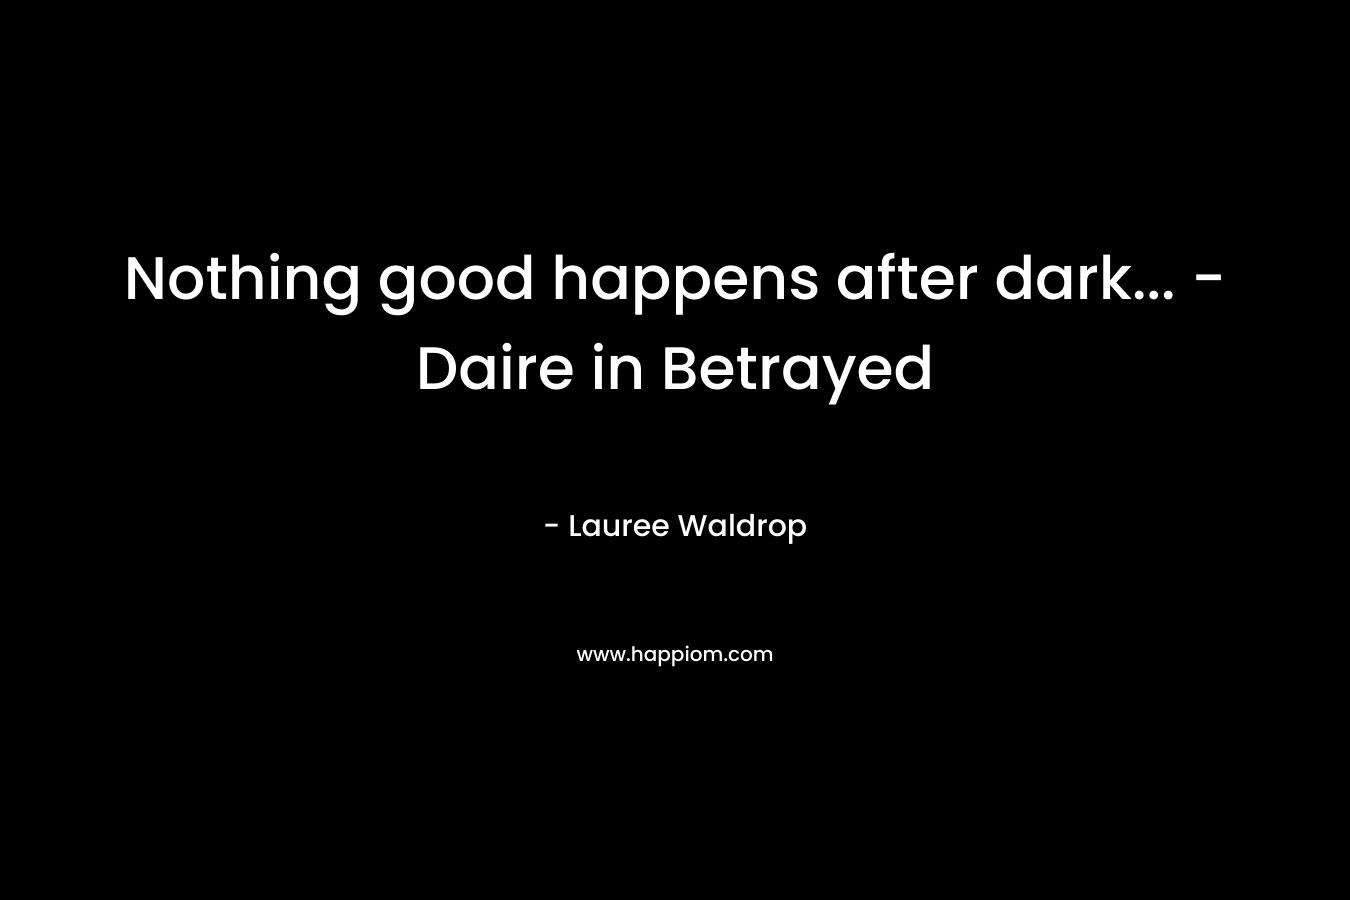 Nothing good happens after dark... -Daire in Betrayed